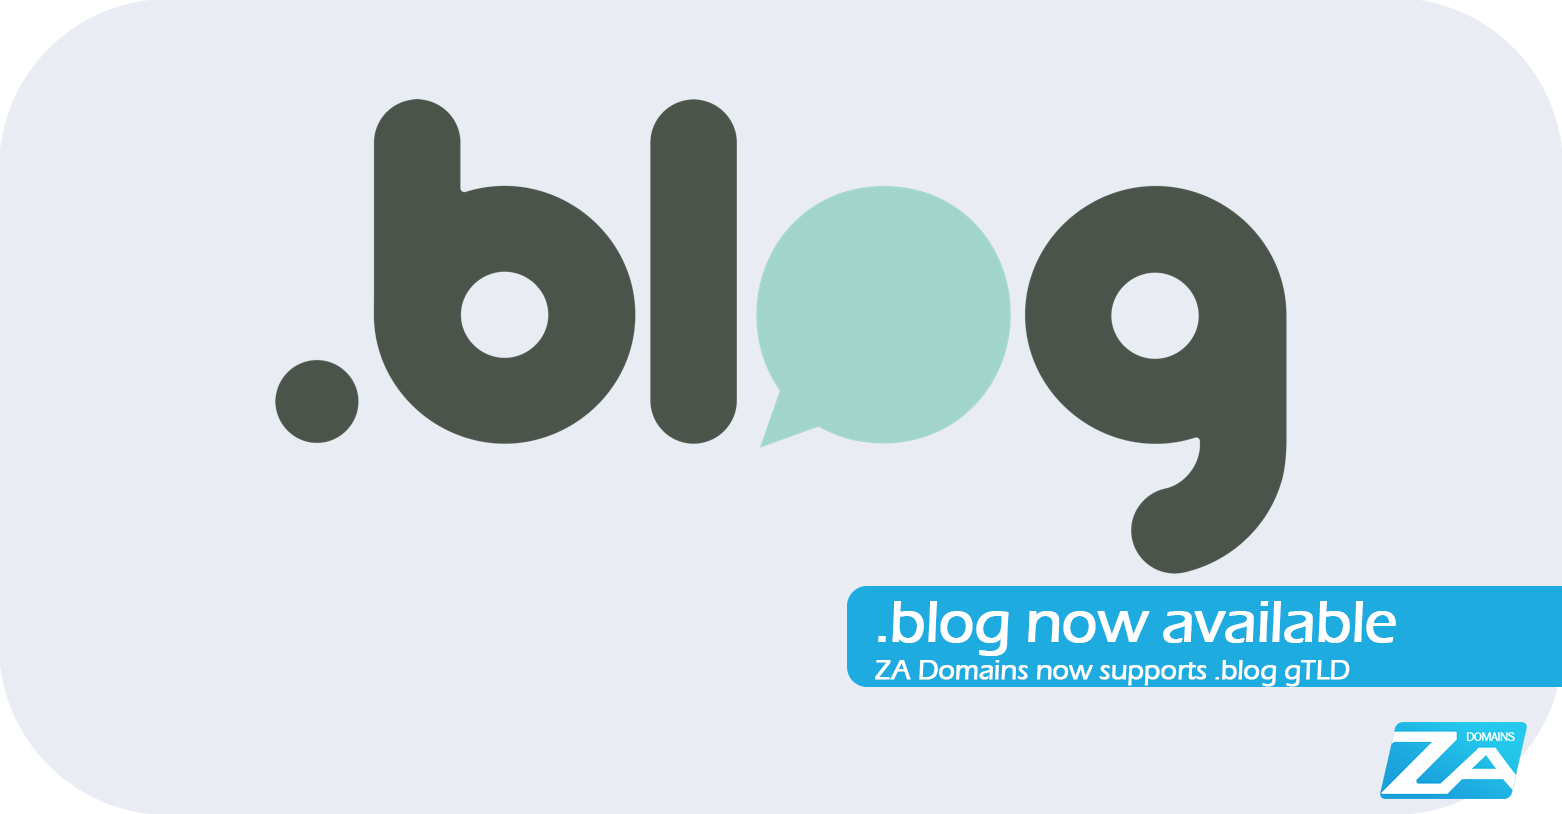 dotBlog now available from ZA Domains